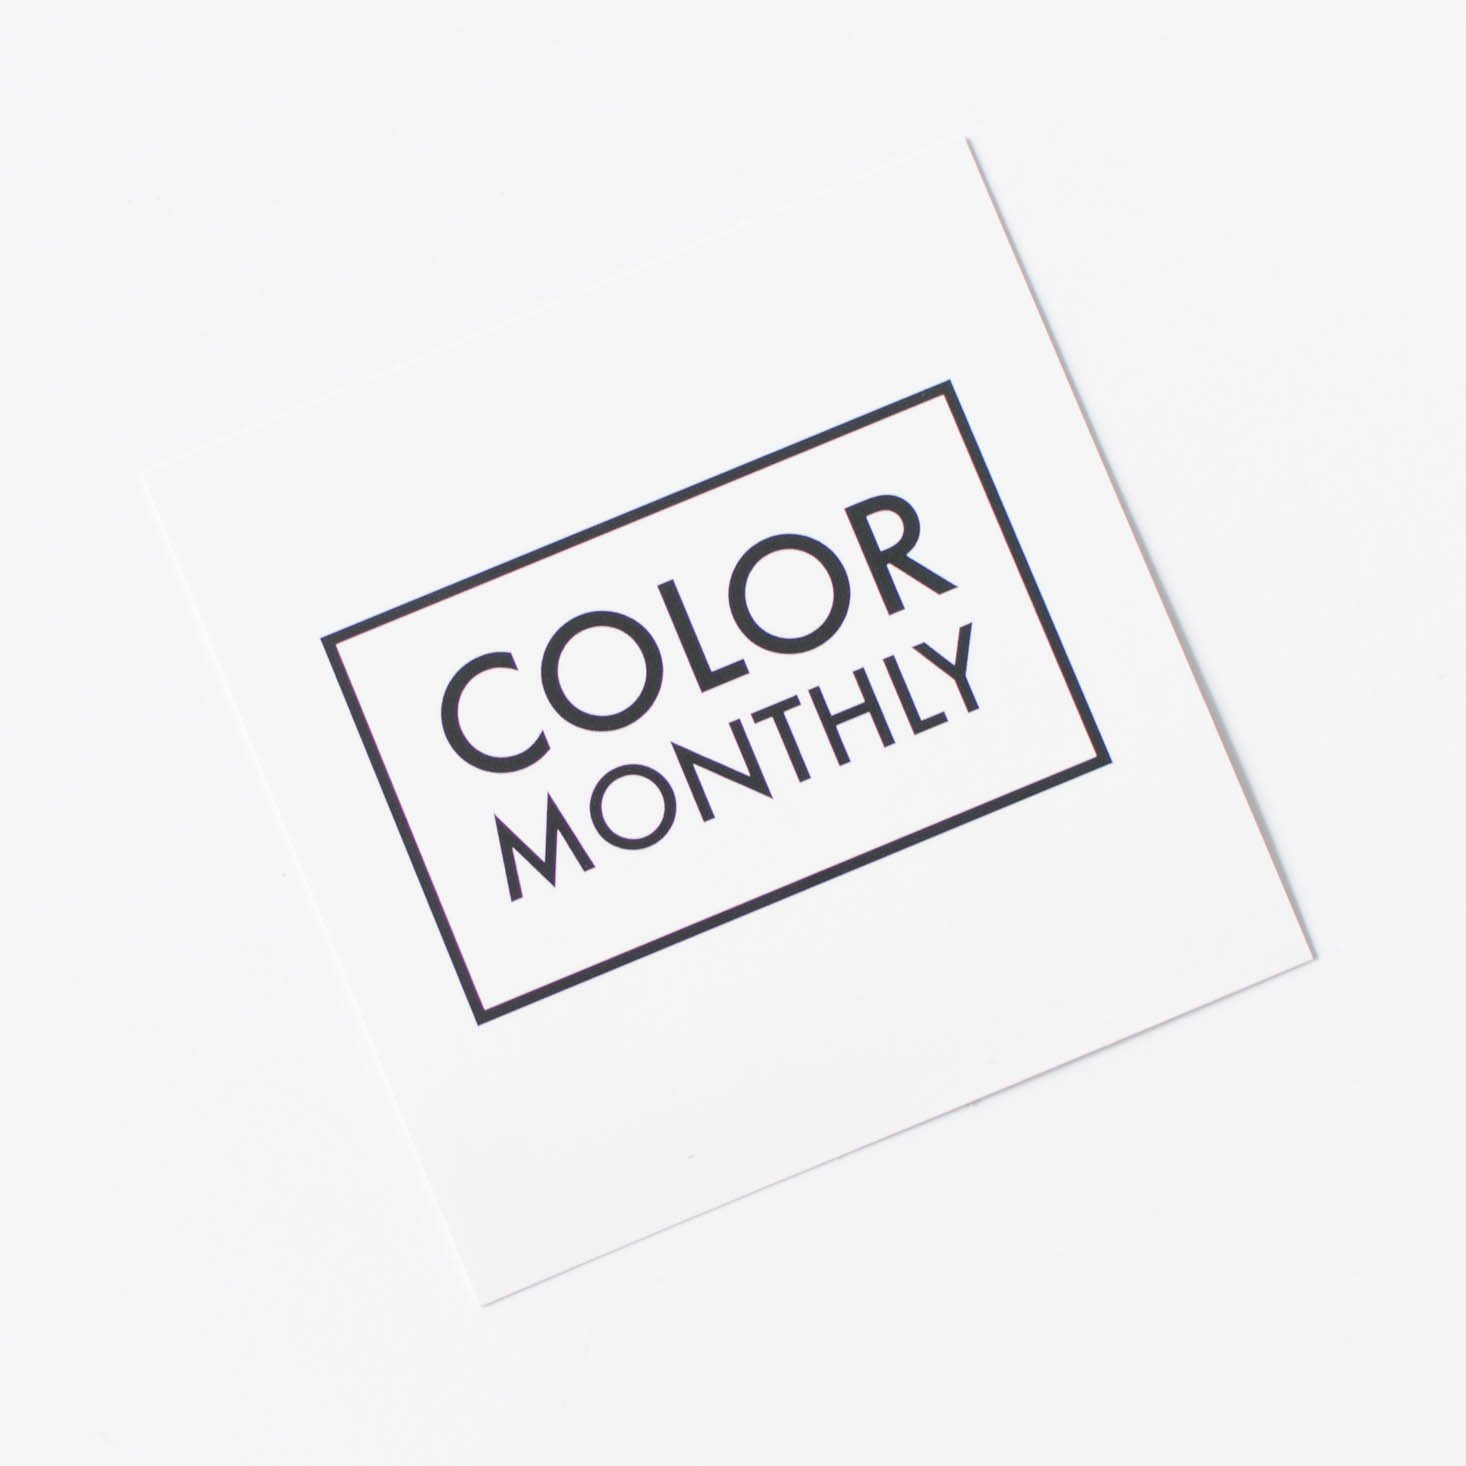 ColorMonthly_082016-040